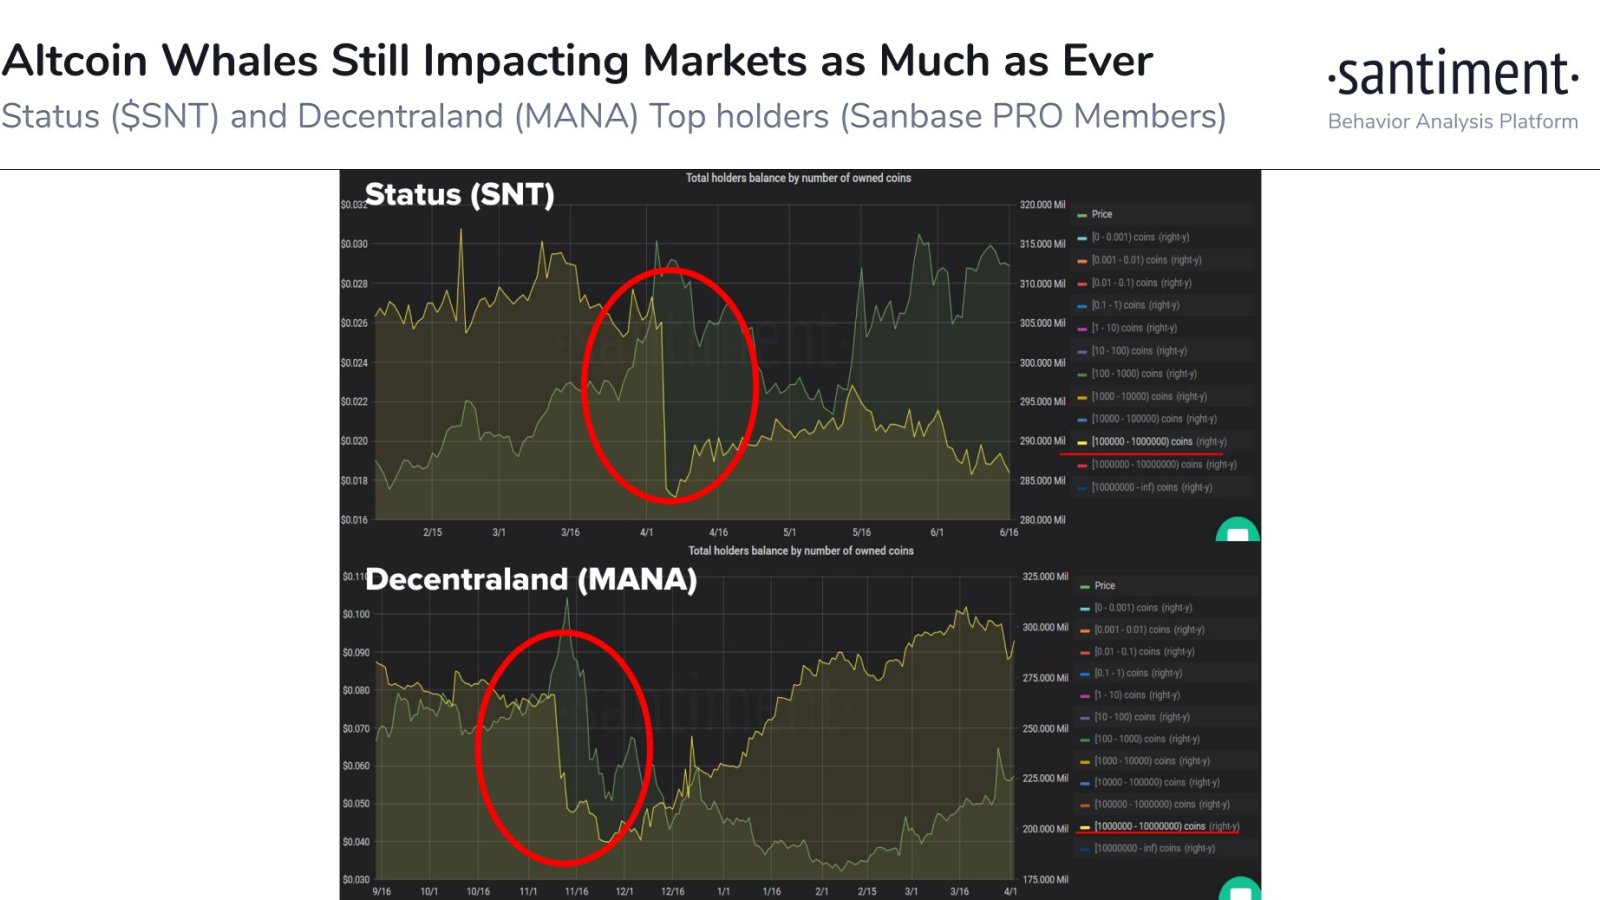 The presence of whales in the altcoin market.